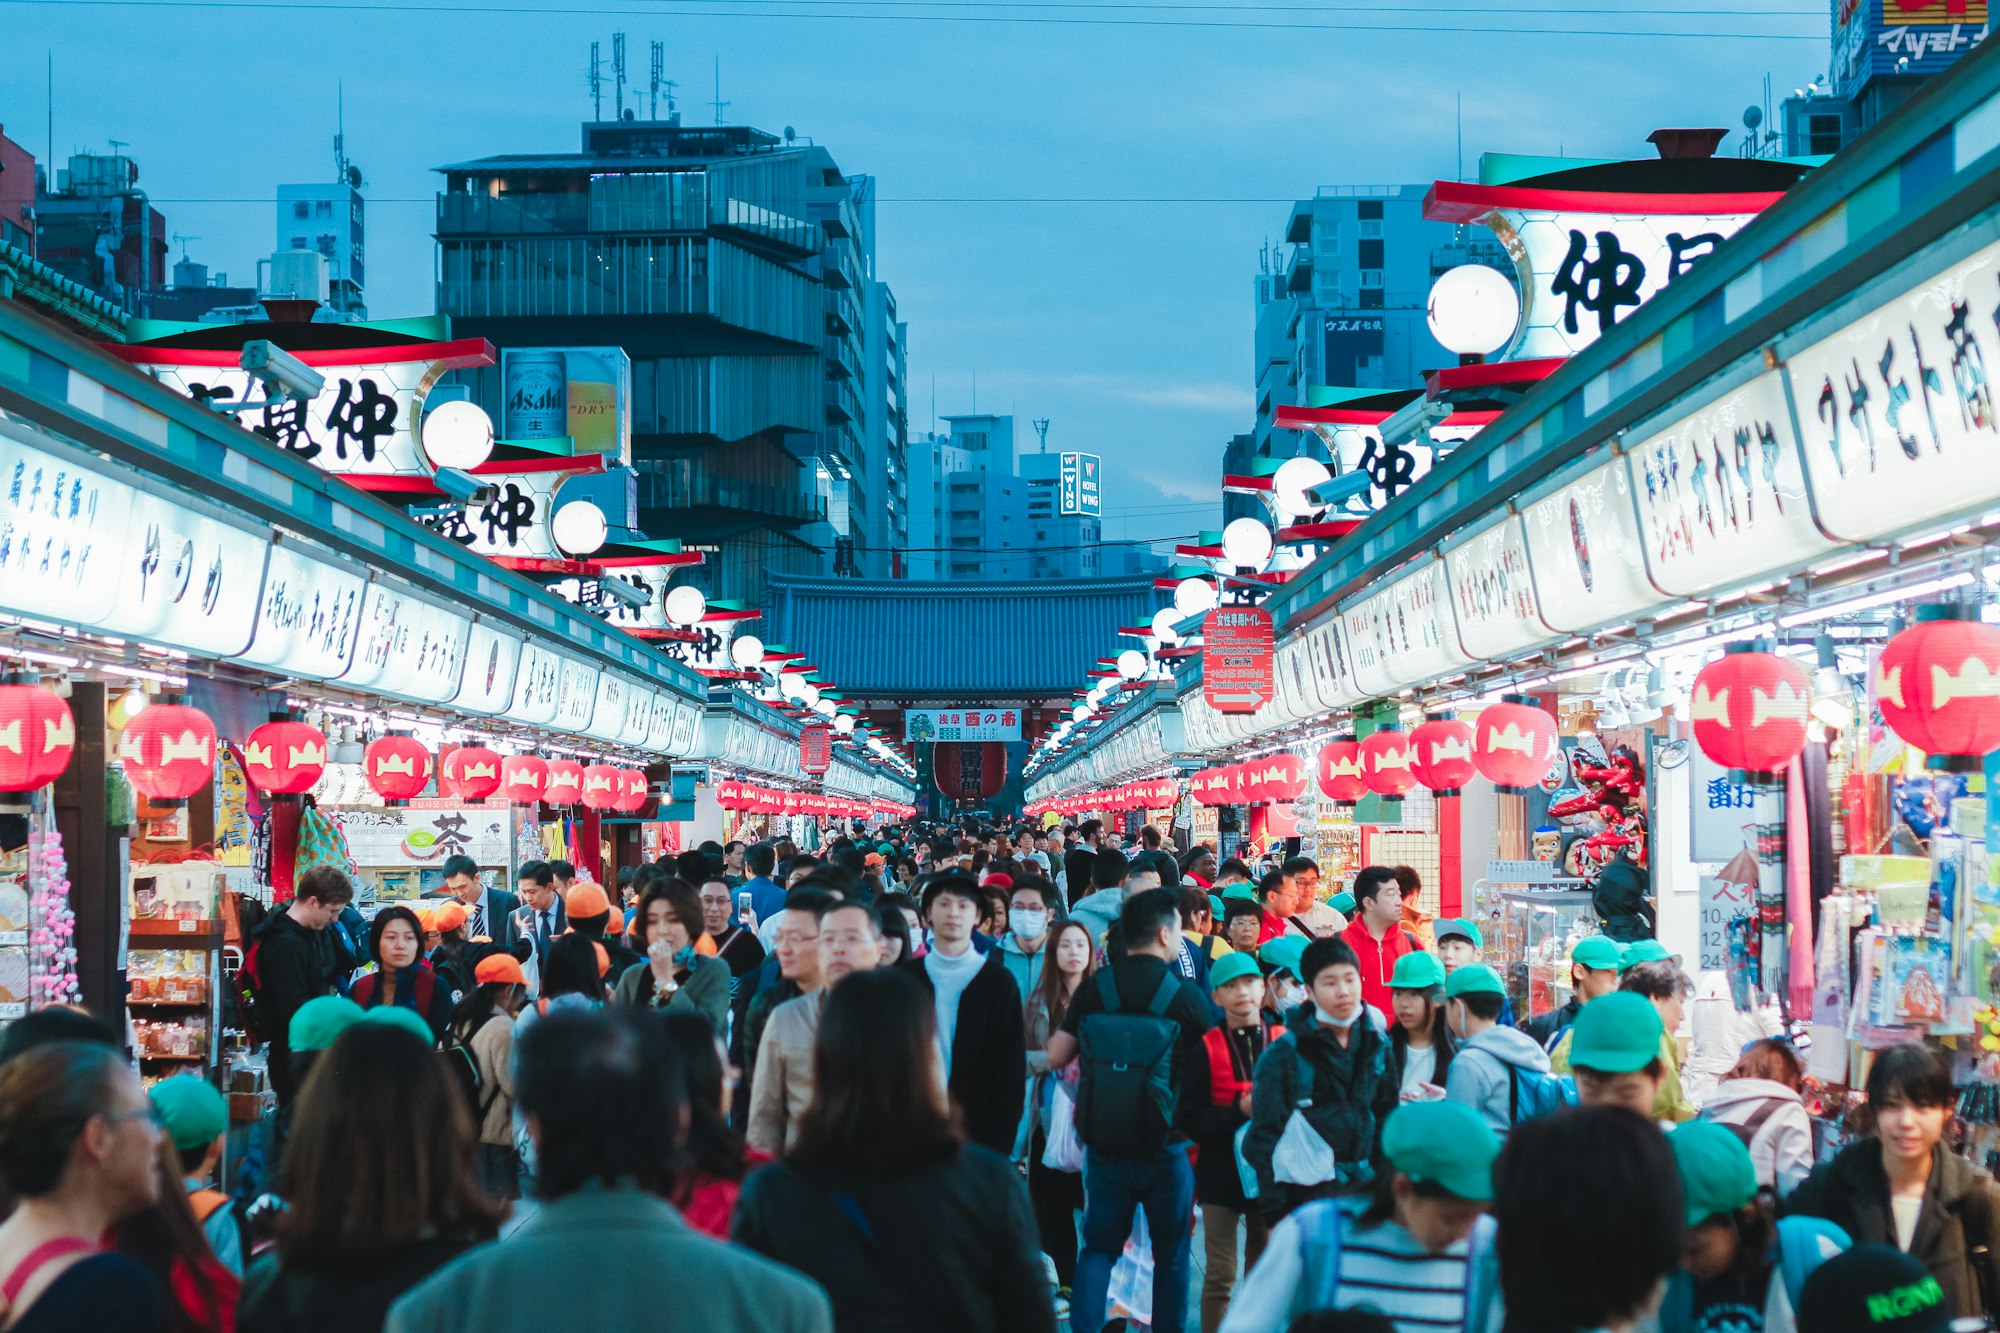 In front of the Sensoji Temple in Tokyo, there is a big market where clothes, food and even offerings are sold. I snapped this picture close to the evening as the lights in the market lit up.